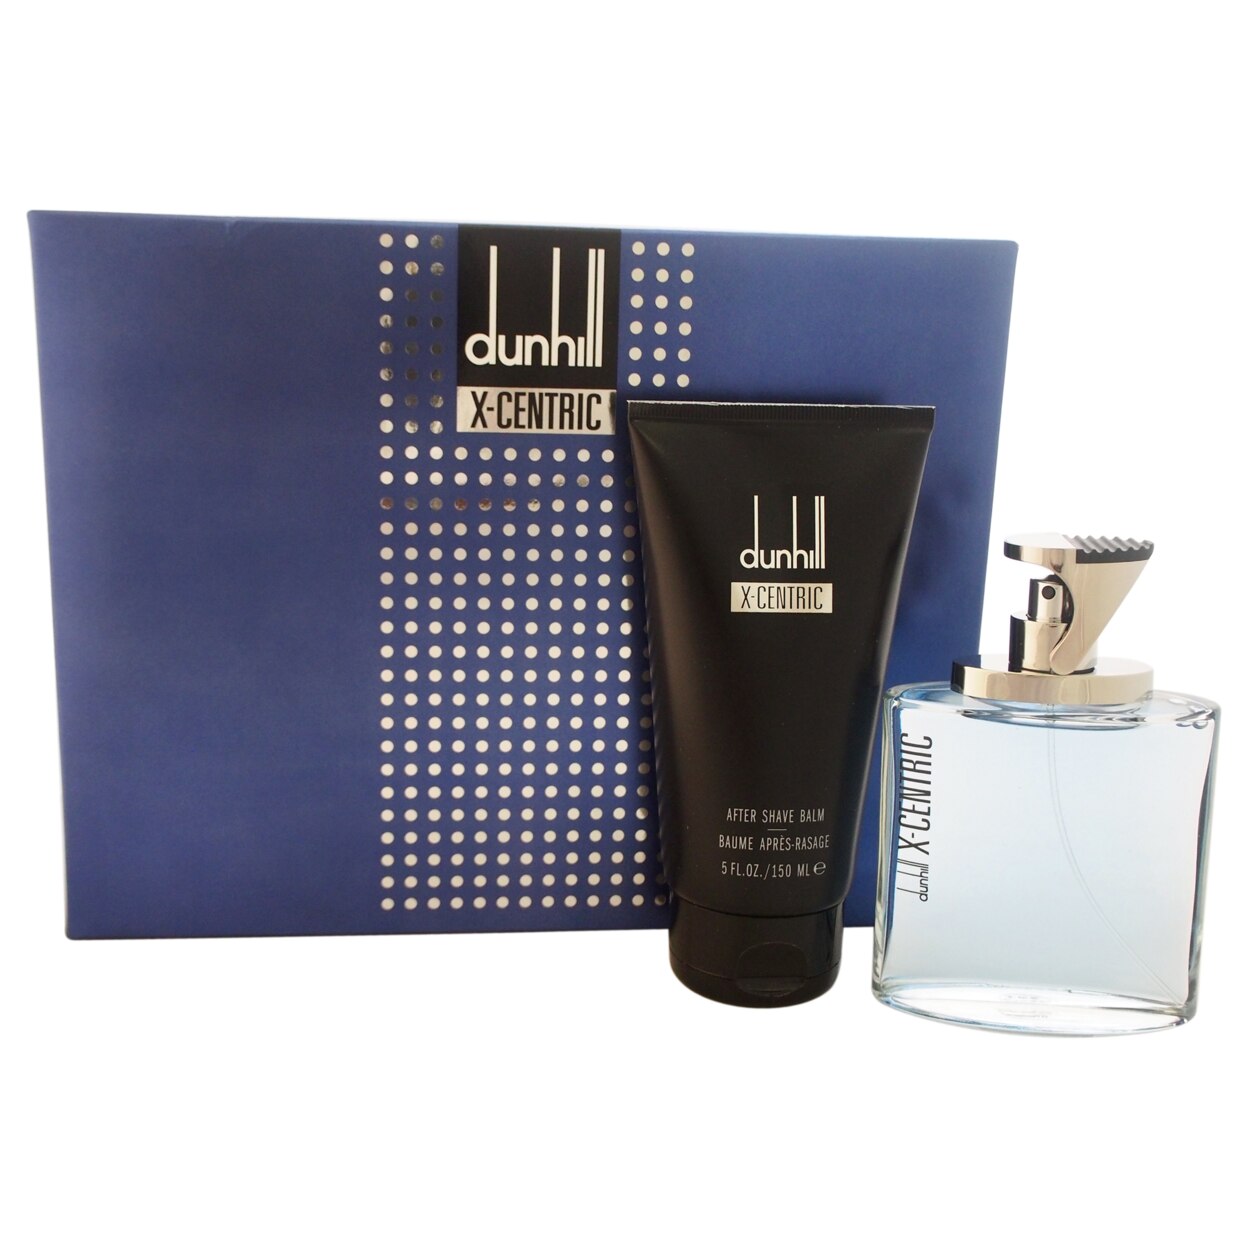 Dunhill X-centric 2 Piece Perfume Gift Set for Men  - Ratans Online Shop - Perfume Wholesale and Retailer Fragrance